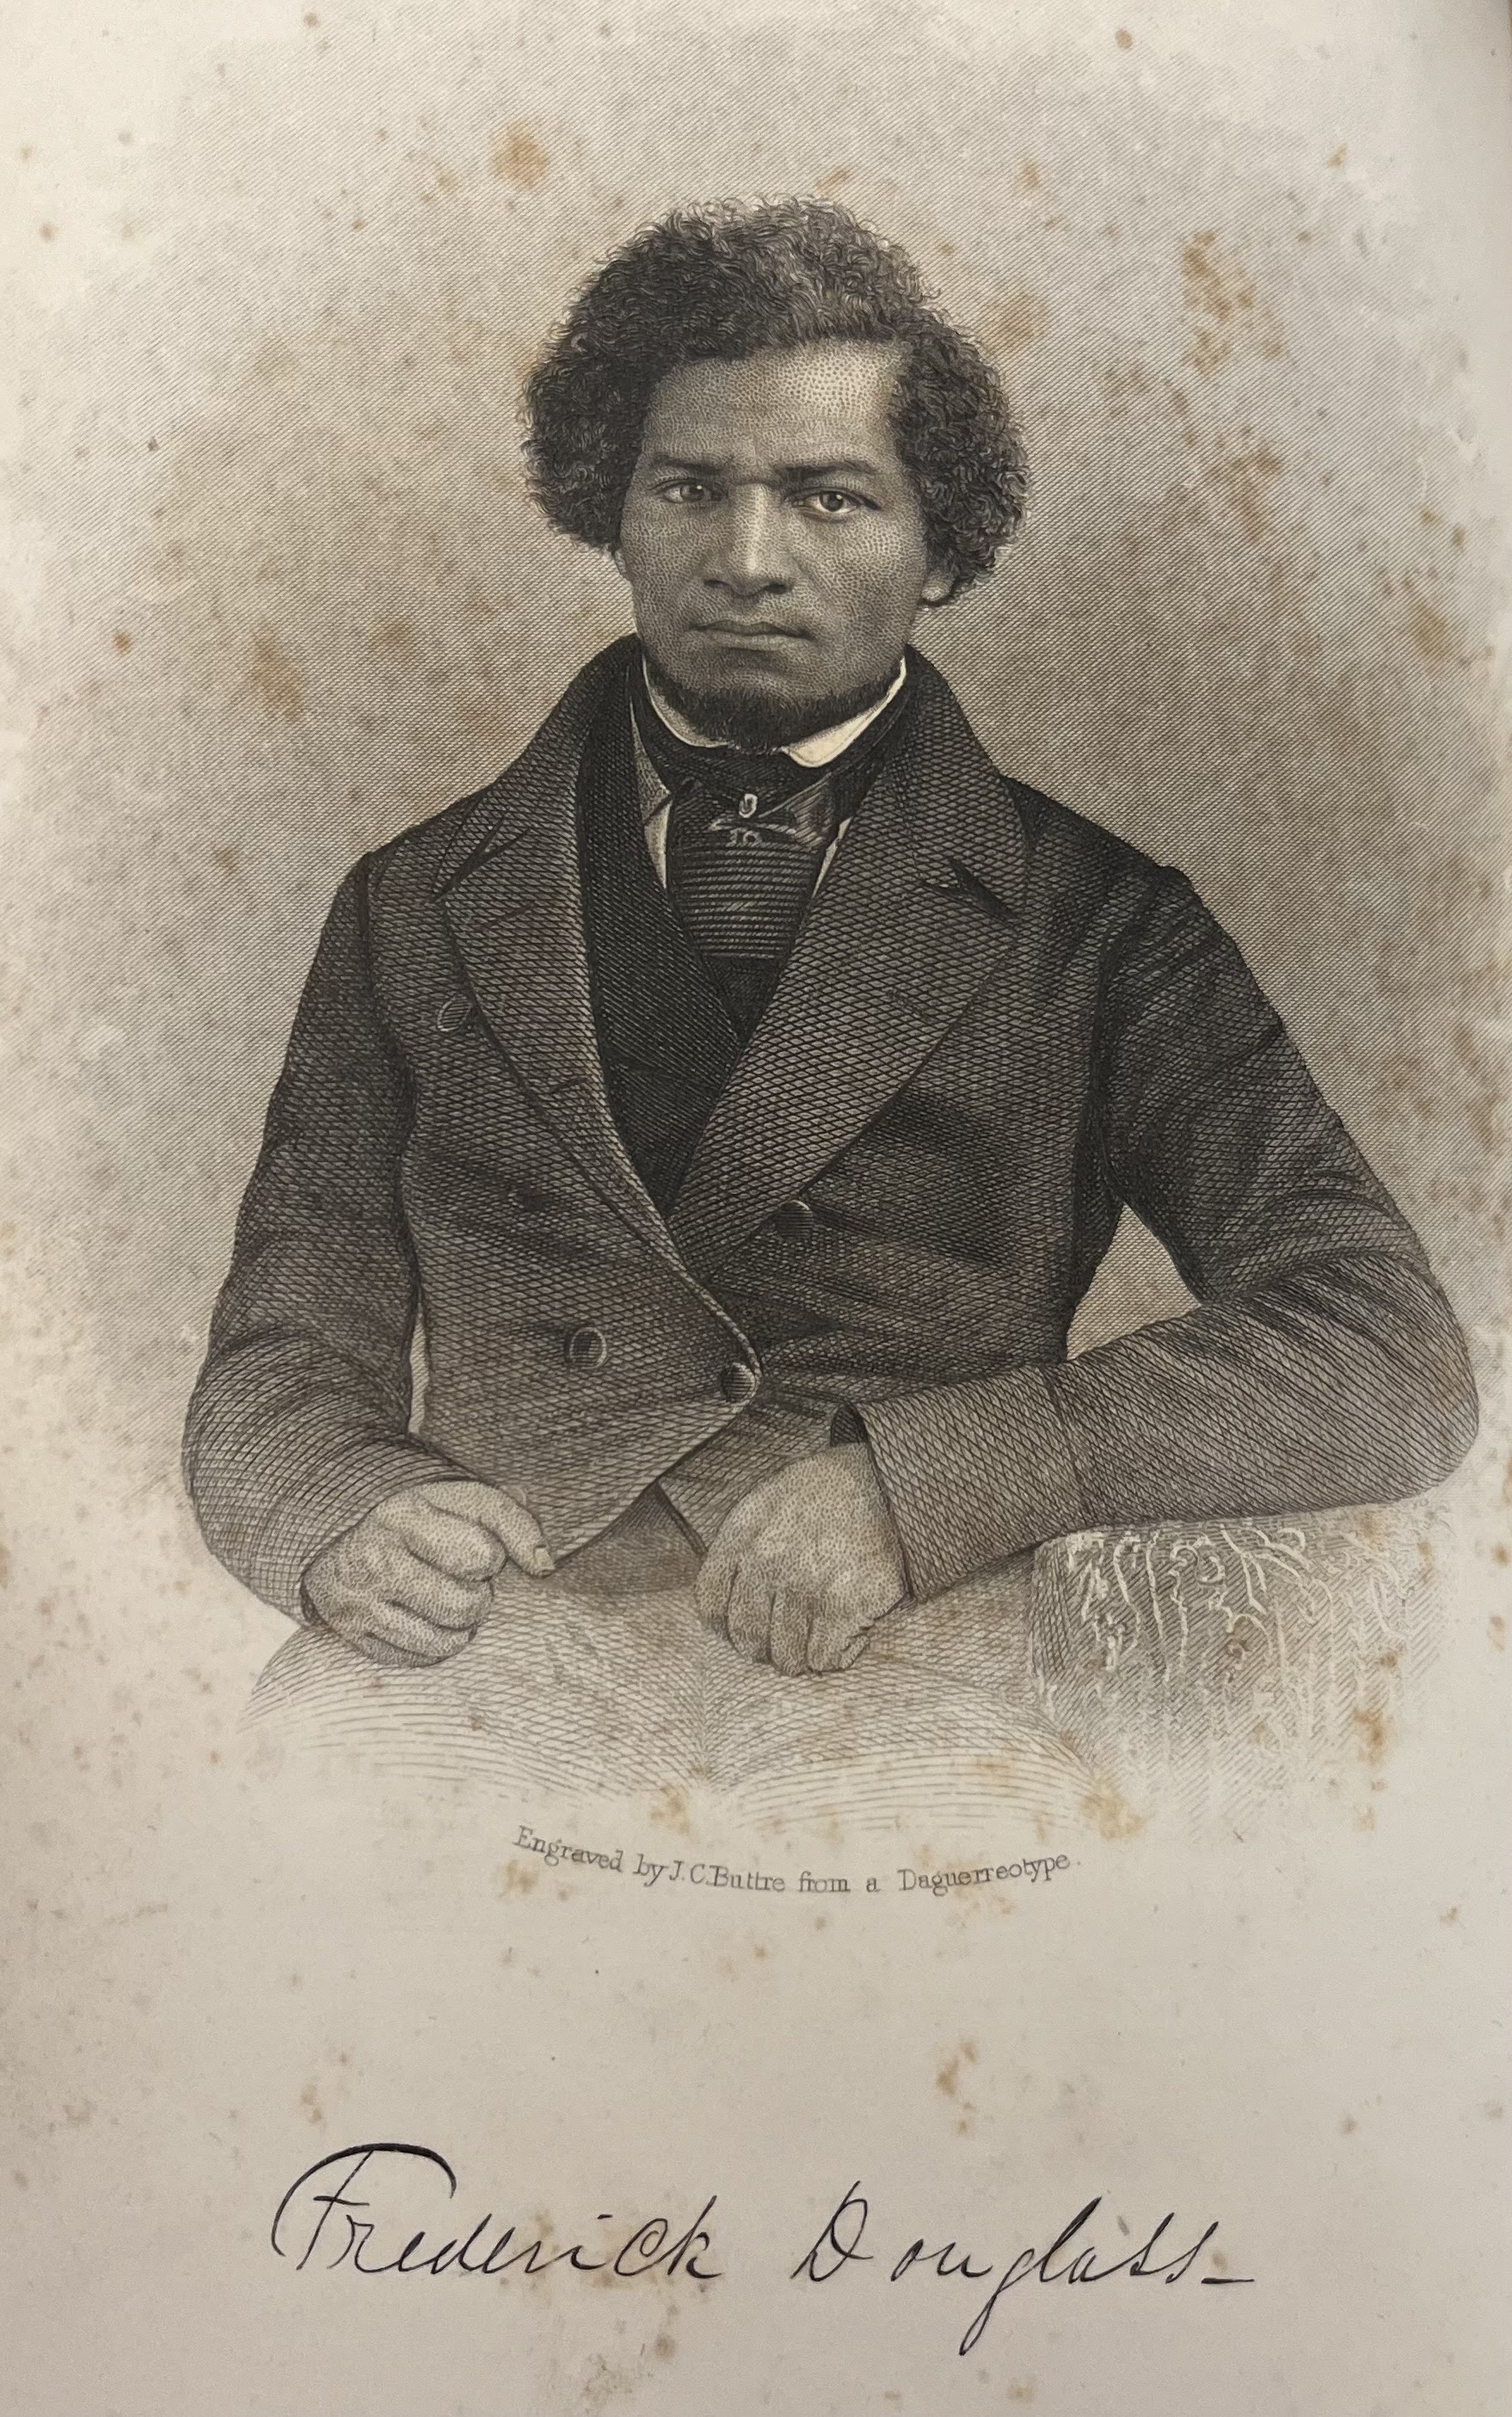 A picture of Frederick Douglass from his 1855 autobiography "My Bondage and My Freedom" in the College Archives.